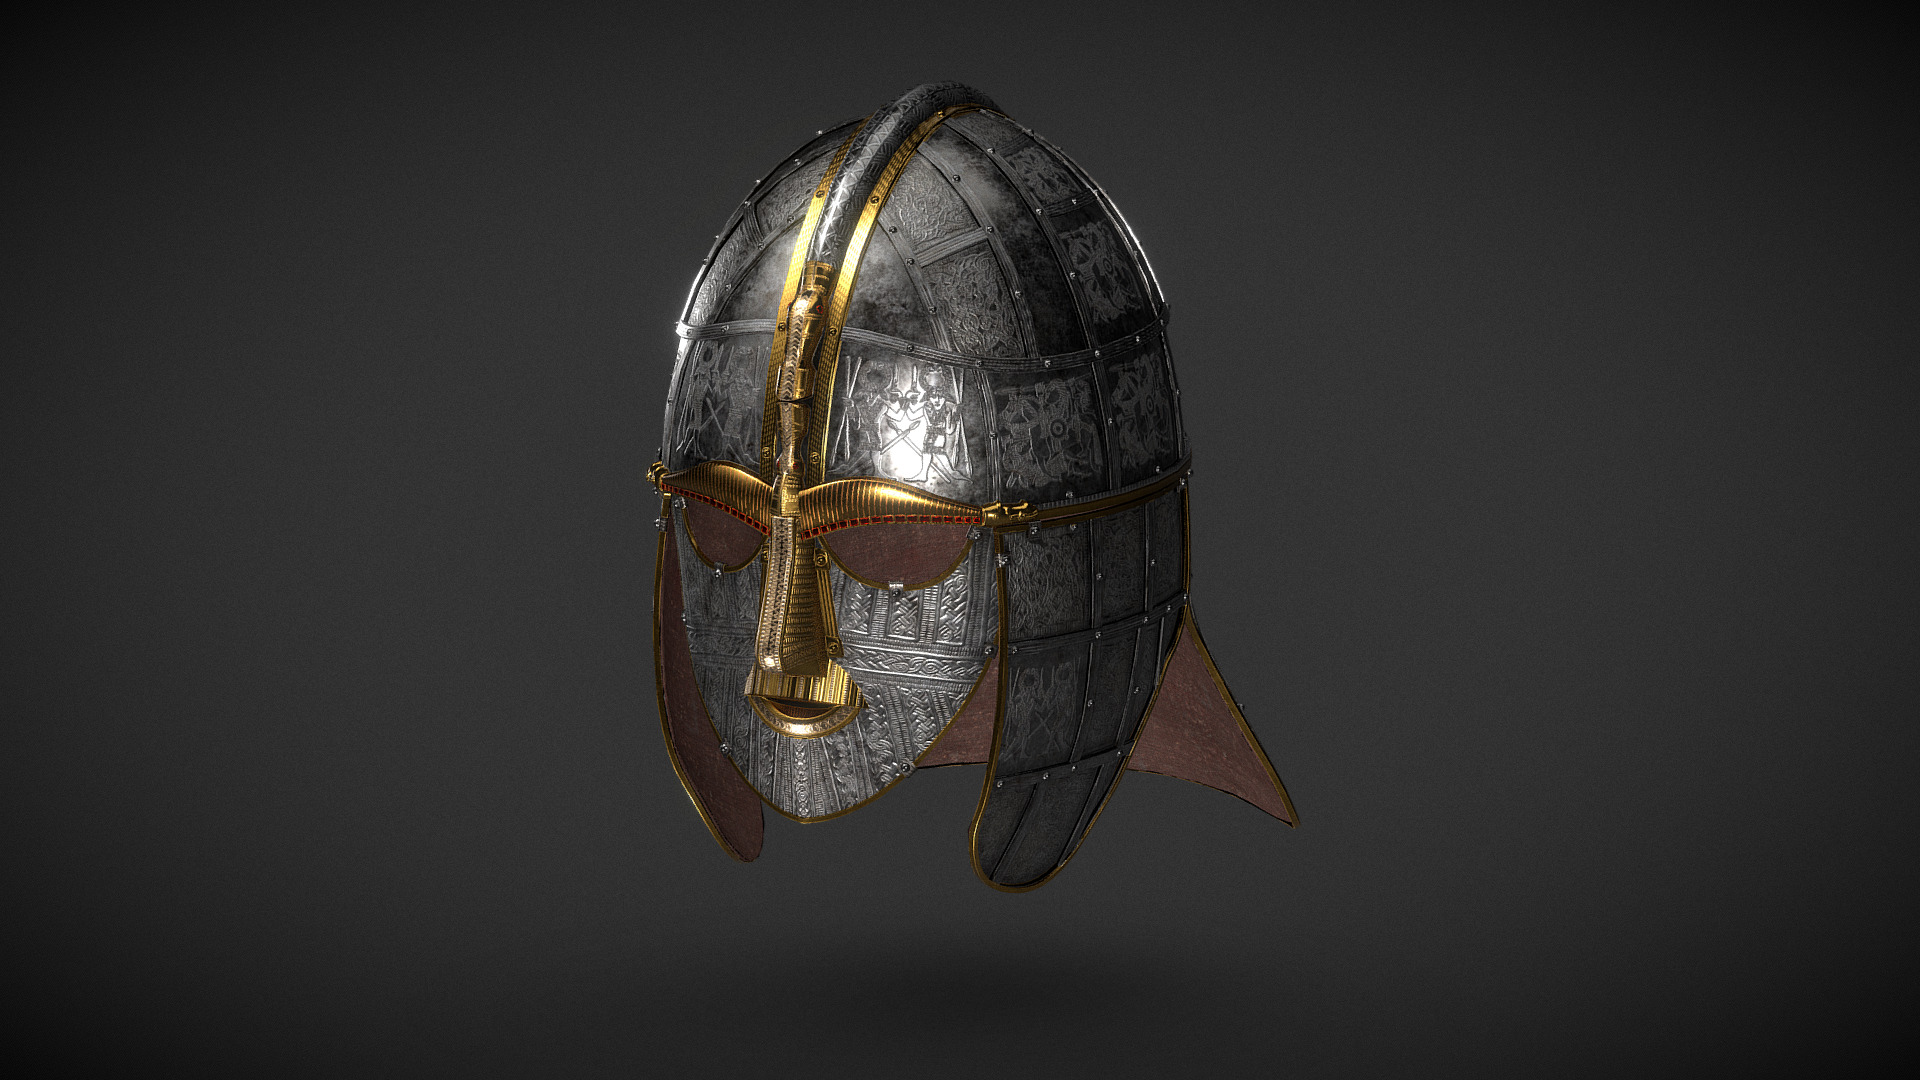 3D model Sutton Hoo Helmet - This is a 3D model of the Sutton Hoo Helmet. The 3D model is about a light fixture on a wall.